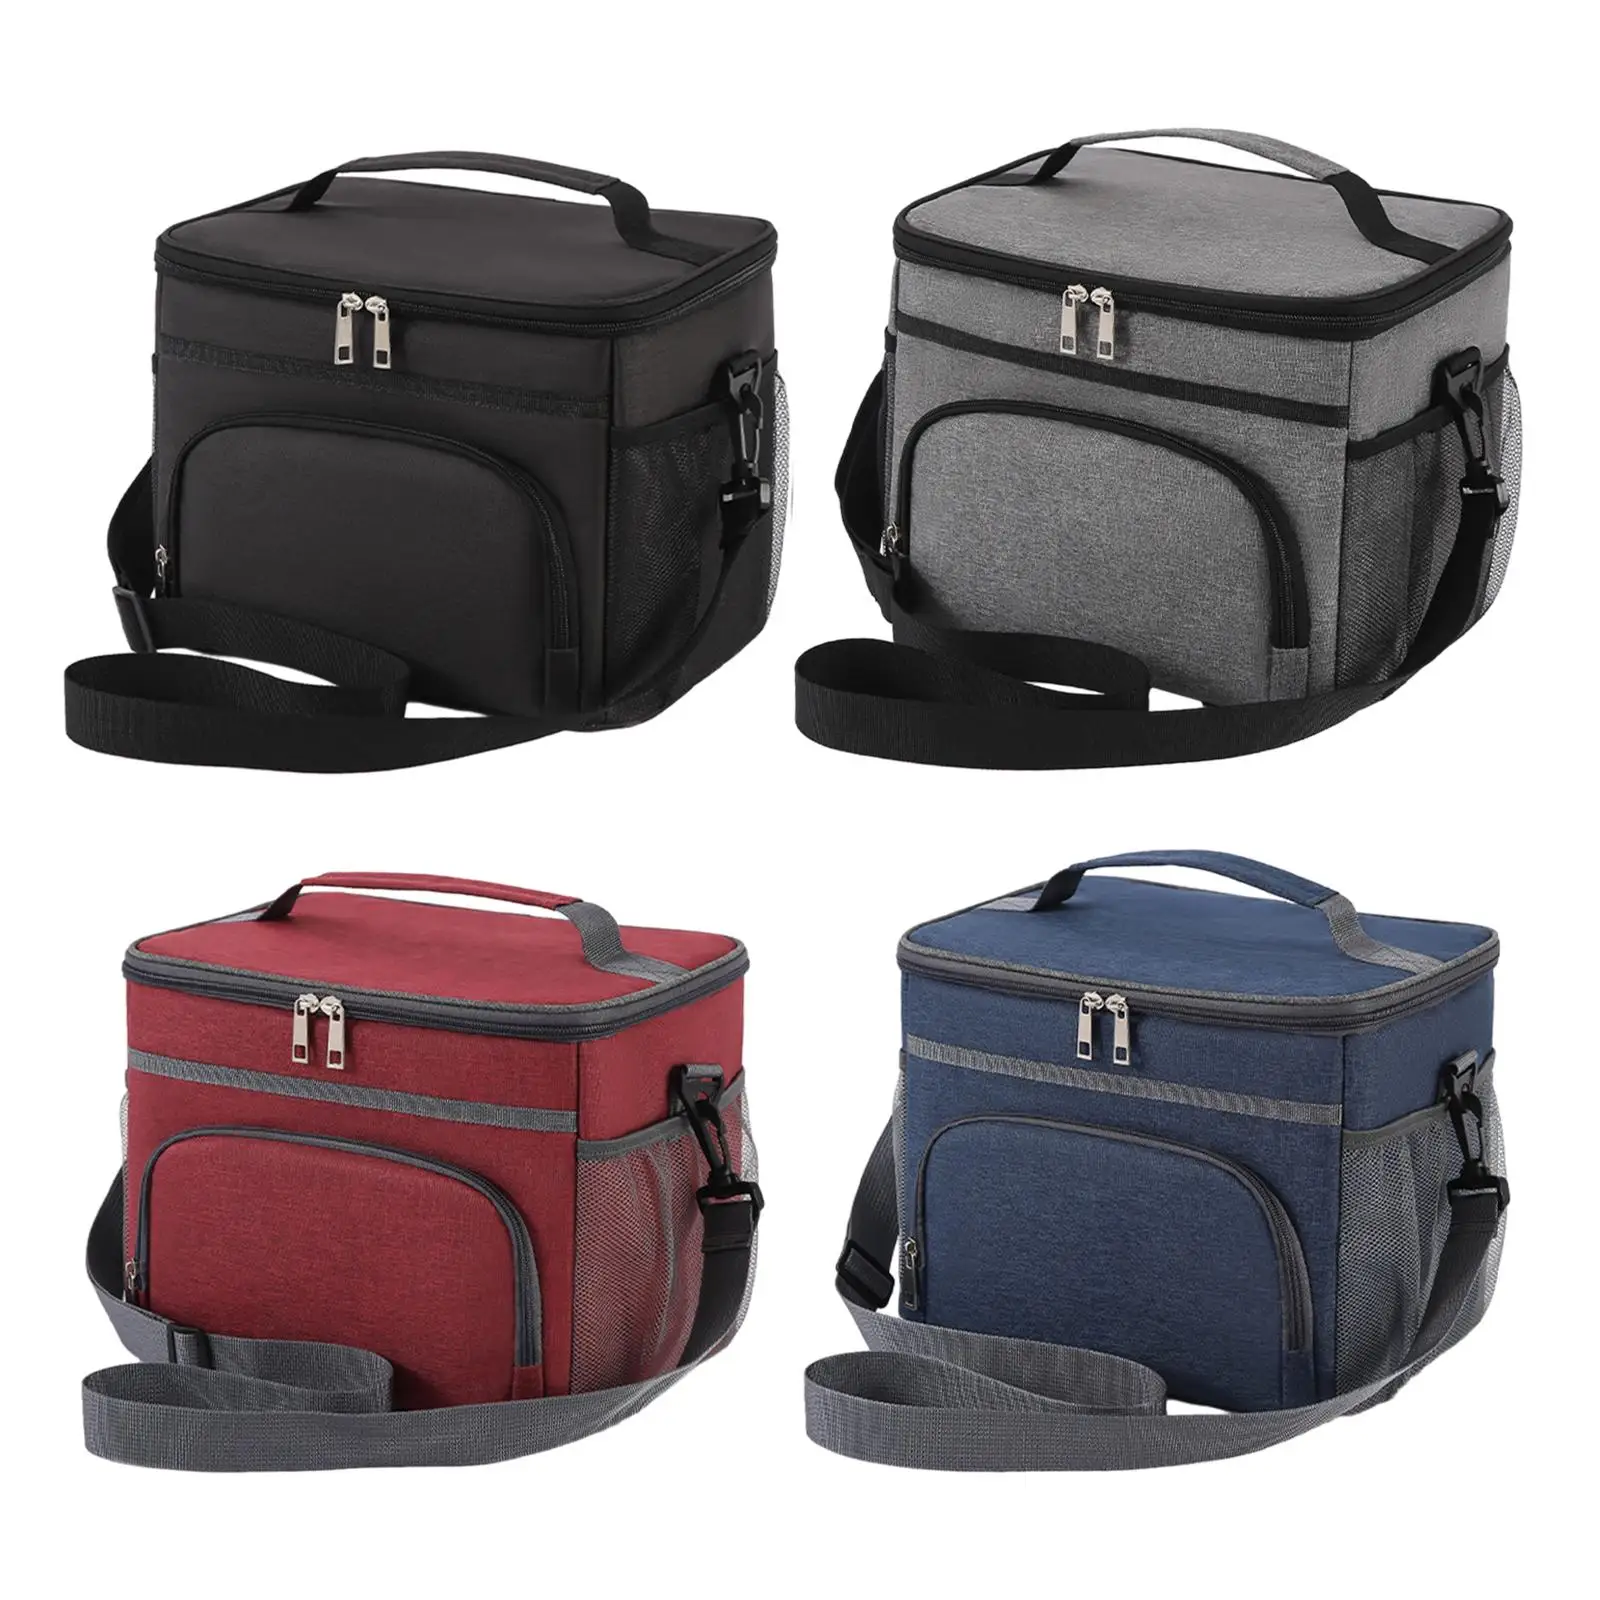 Portable Lunchbox Leakproof with Adjustable Shoulder Strap Tote Bag Organizer for Picnic Office Work Women Men Adults